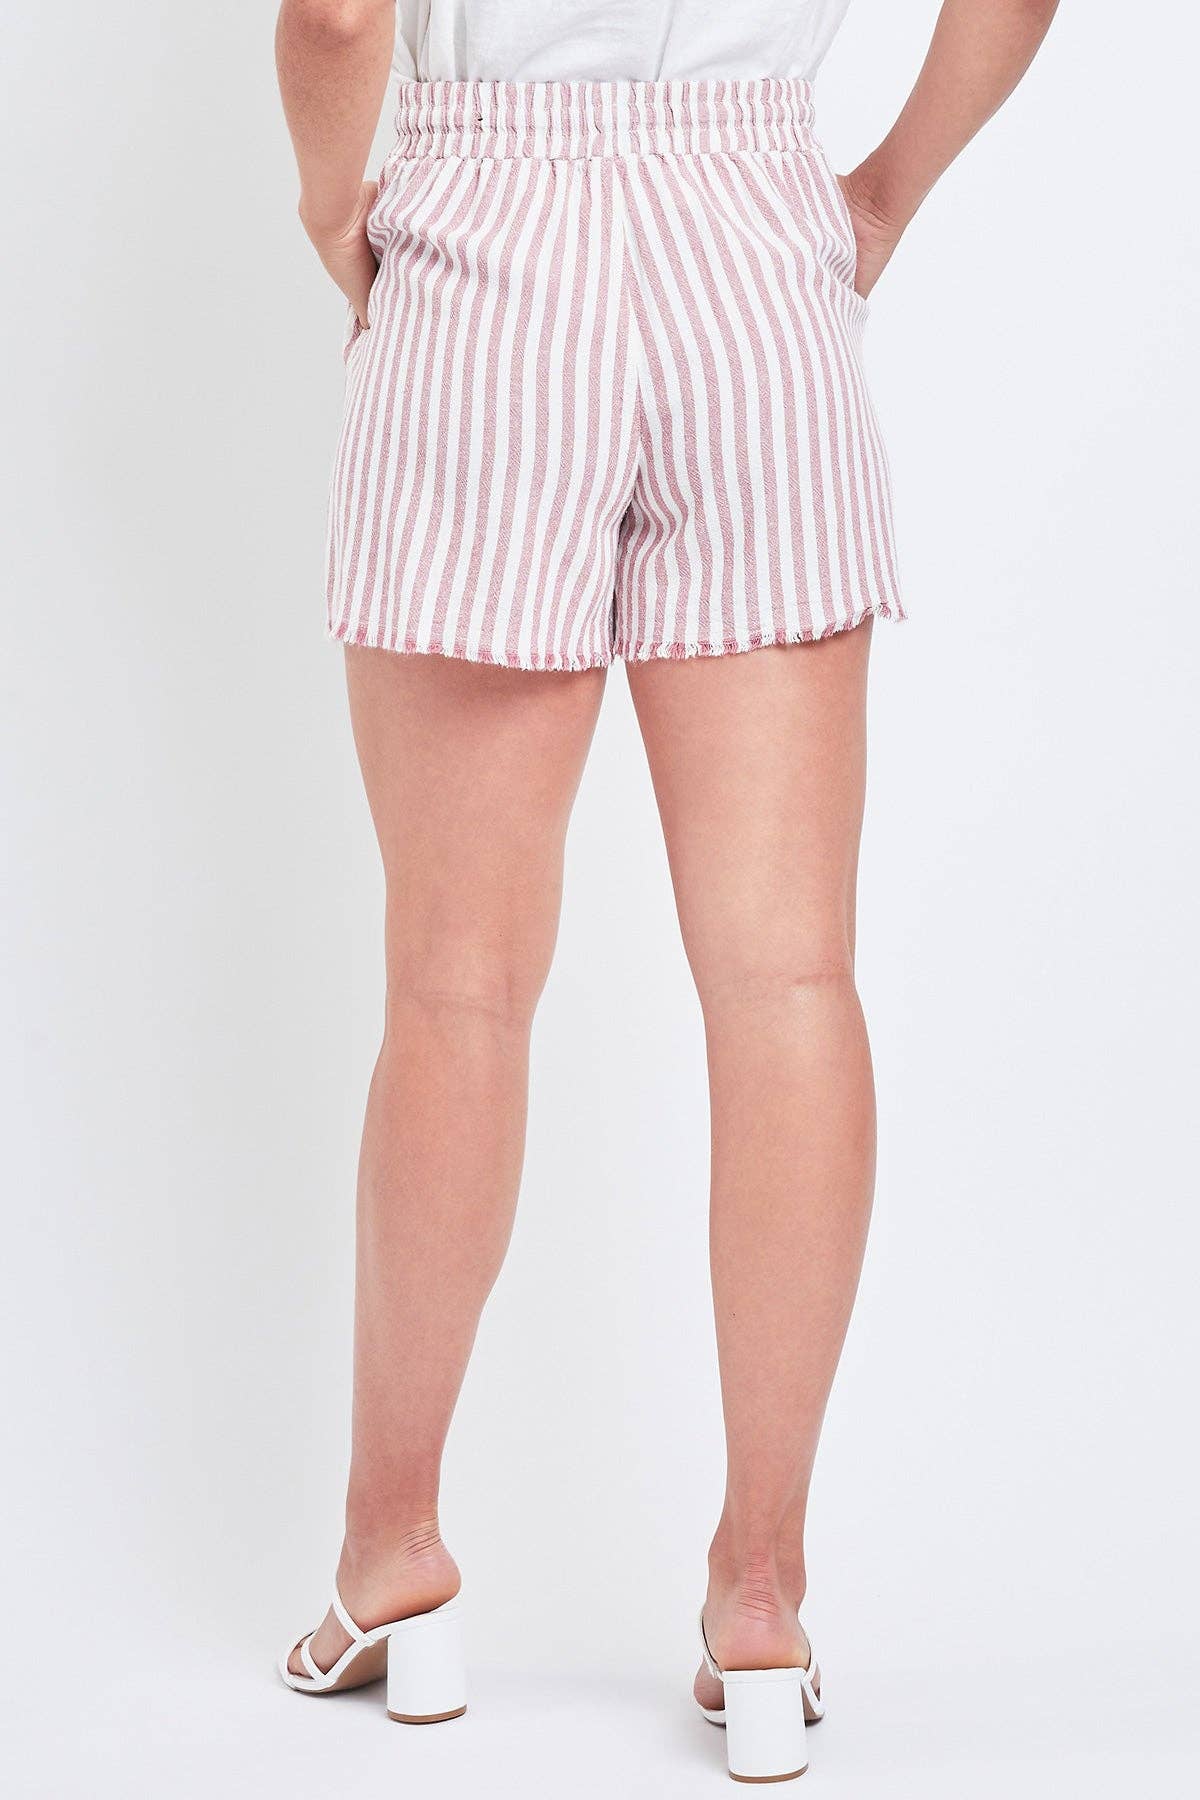 YMI - Missy Linen Lounge Shorts with Frayed Hem RED AWN